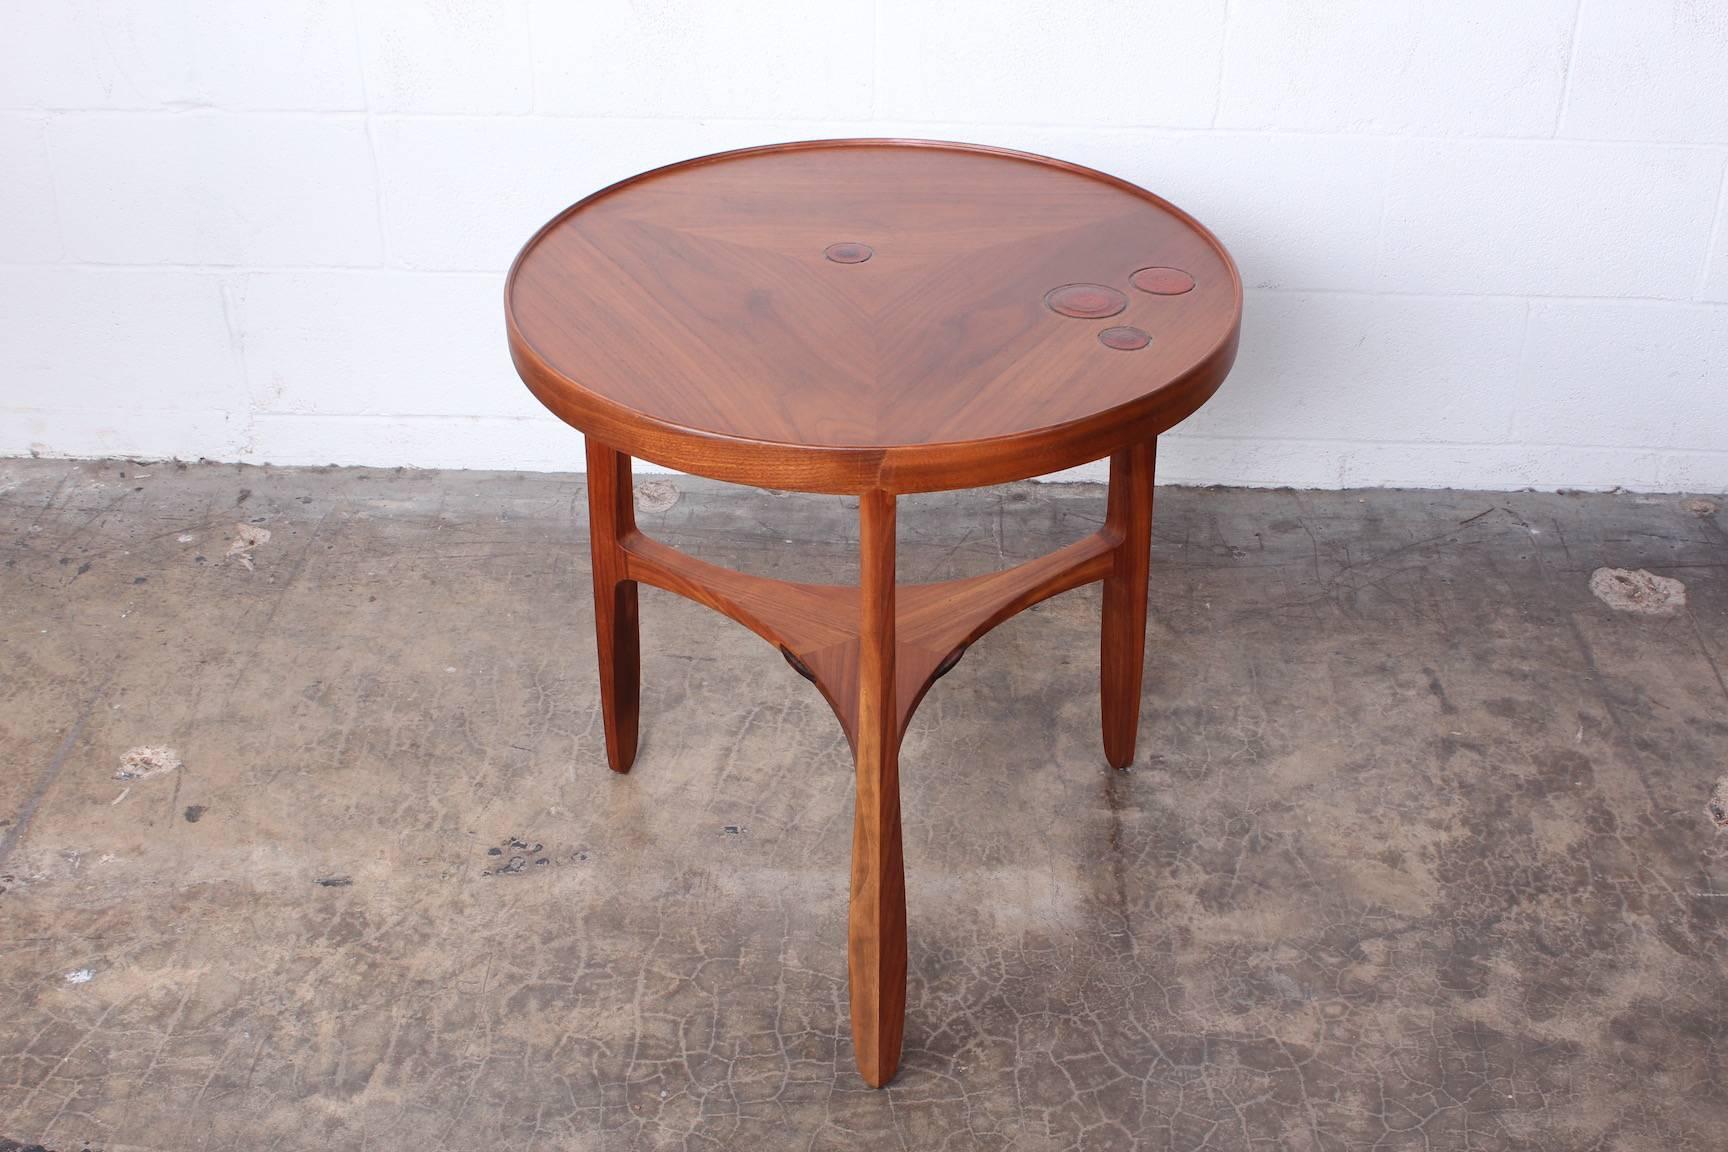 A walnut Janus table with inset Natzler ceramic tiles. Designed by Edward Wormley for Dunbar.